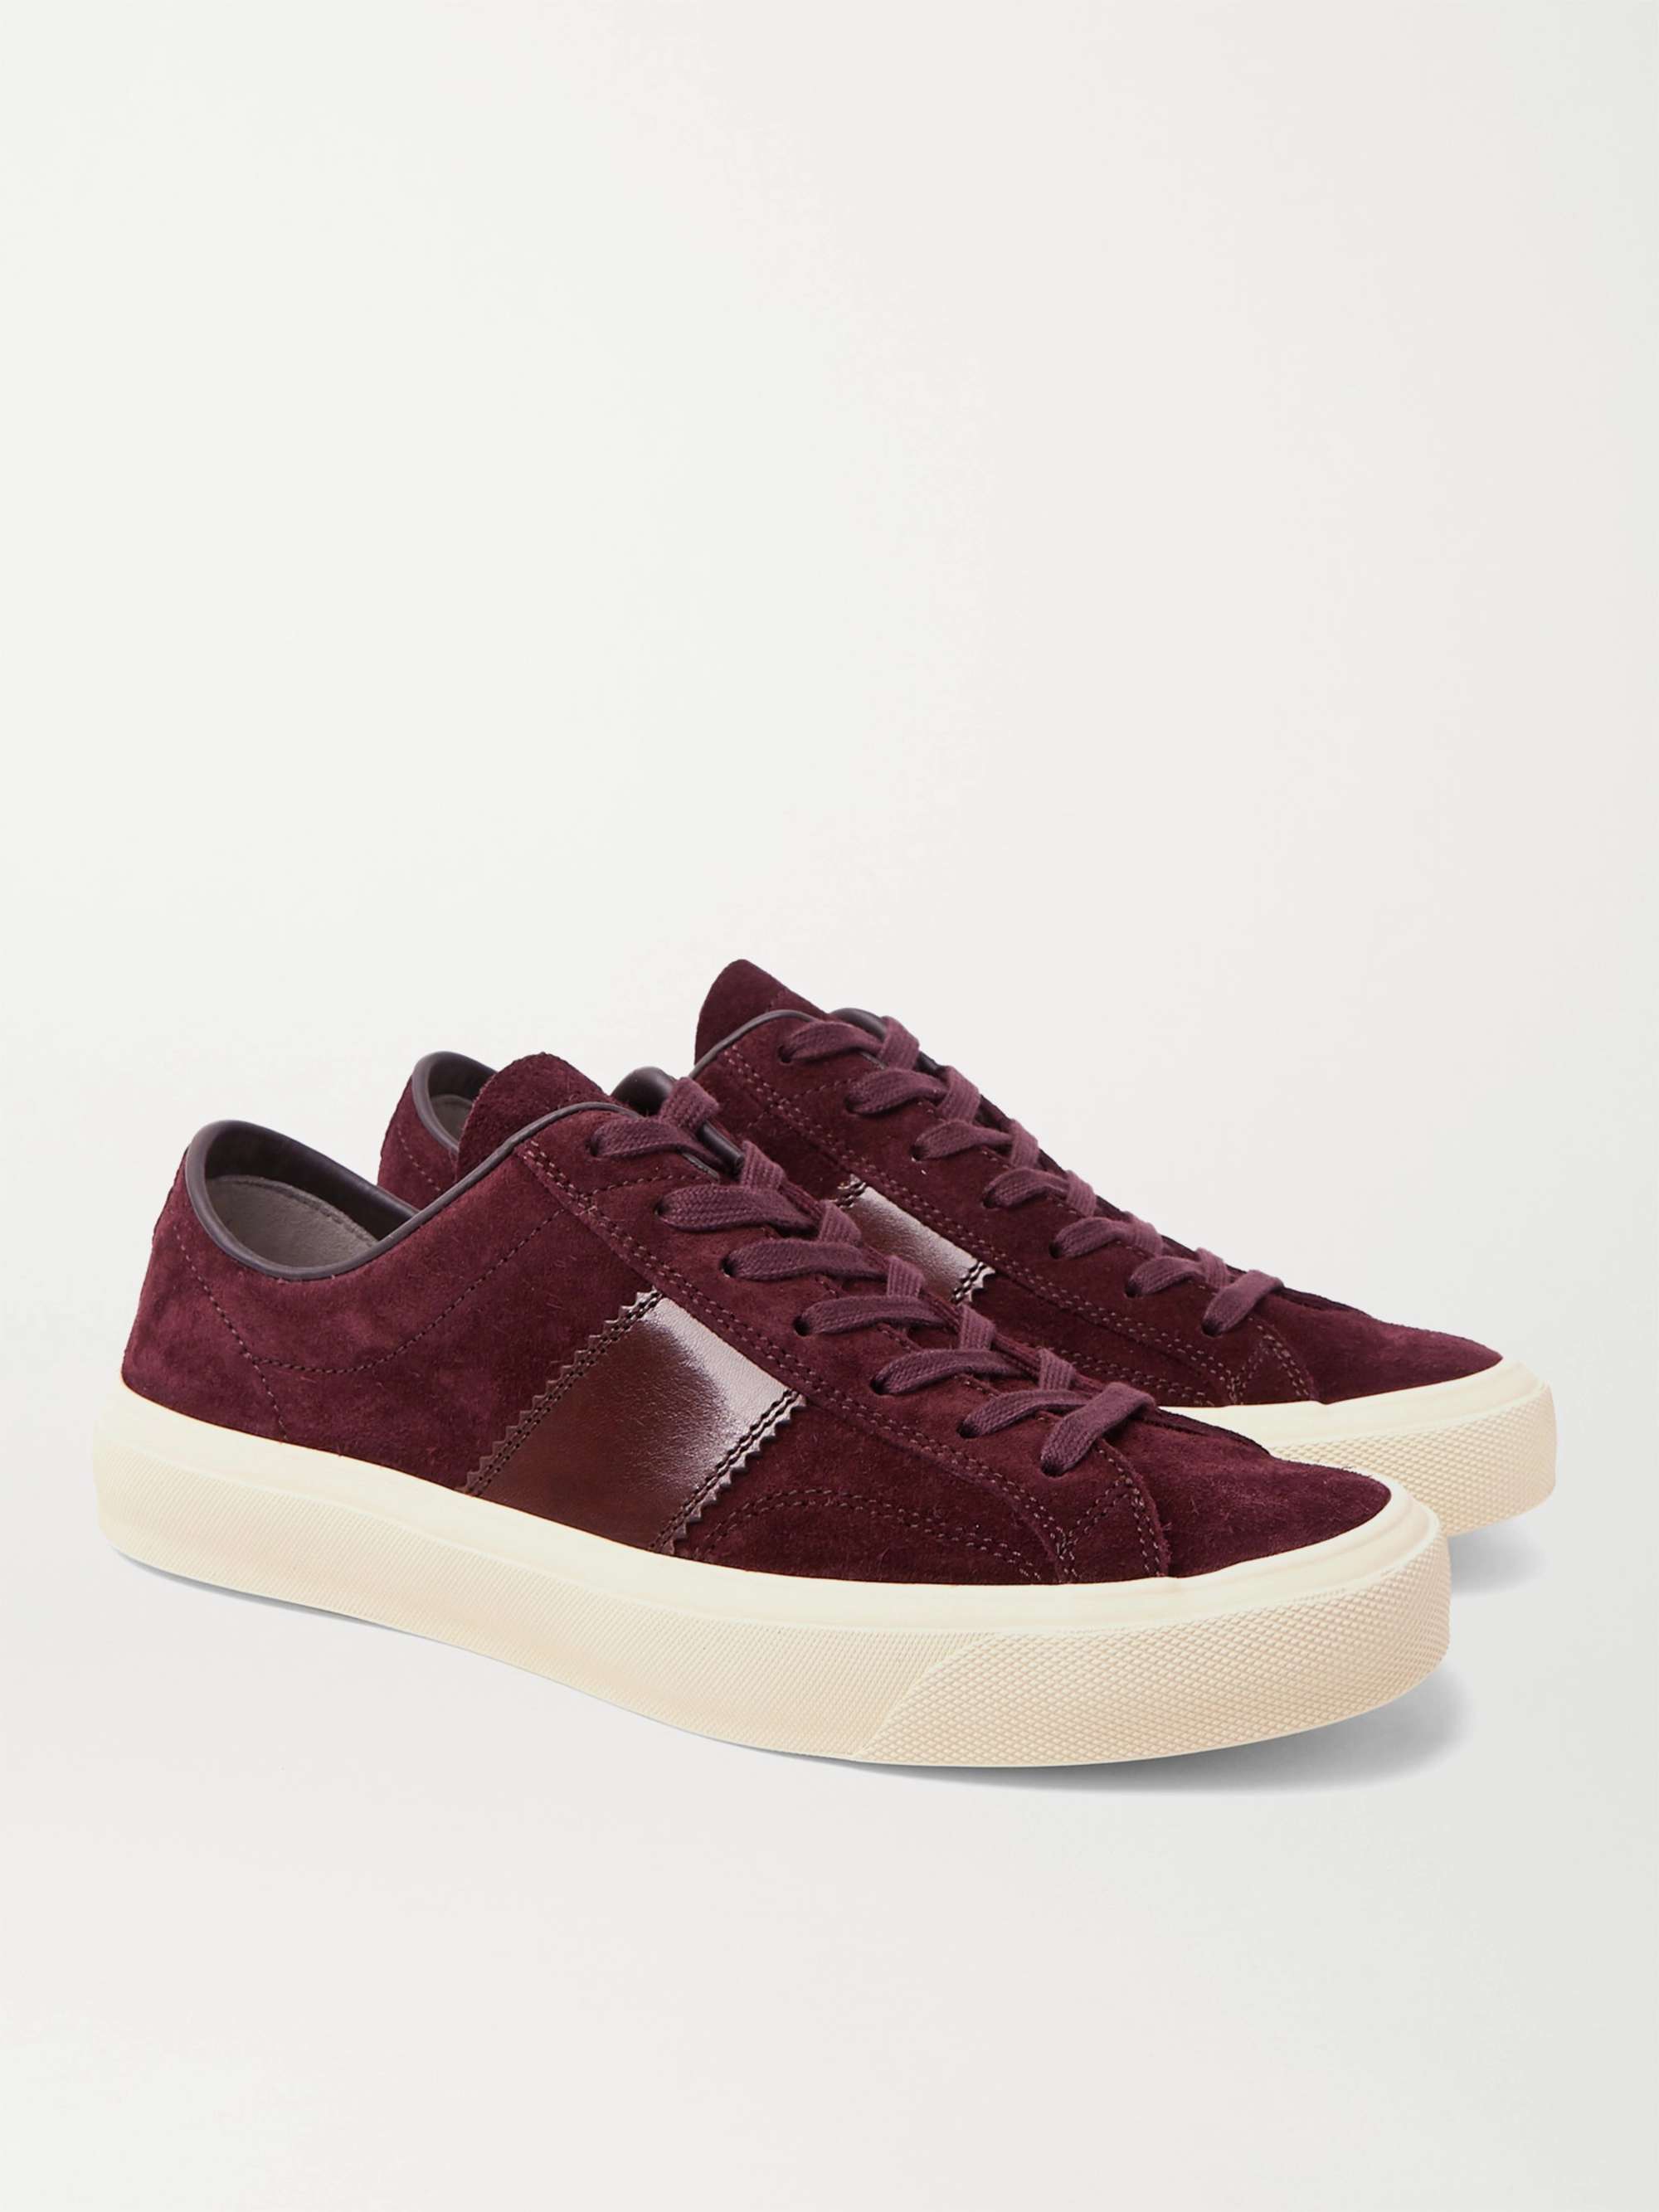 TOM FORD Cambridge Suede Sneakers